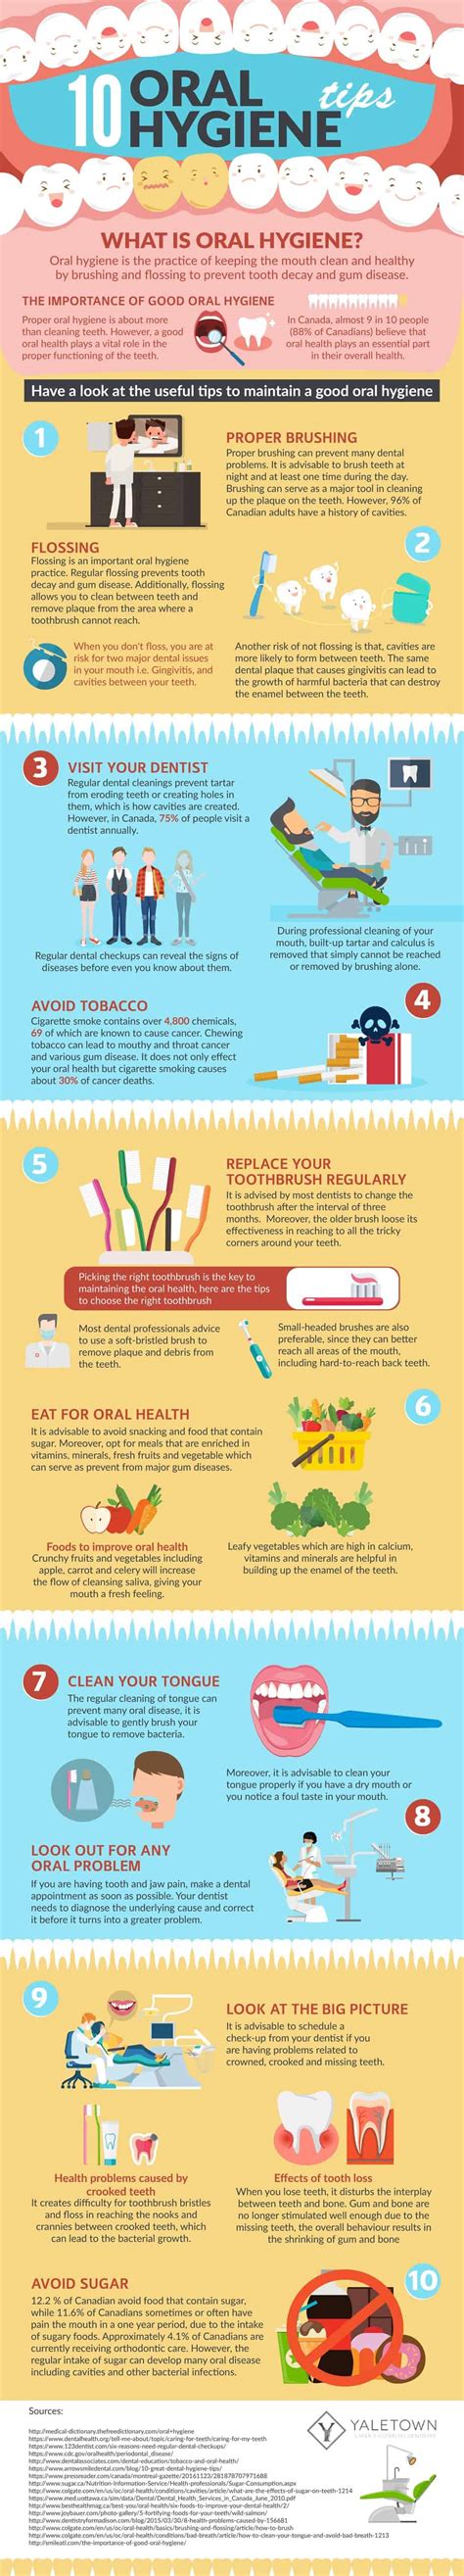 10 Oral Hygiene Tips Infographic Dentist In Vancouver Bc